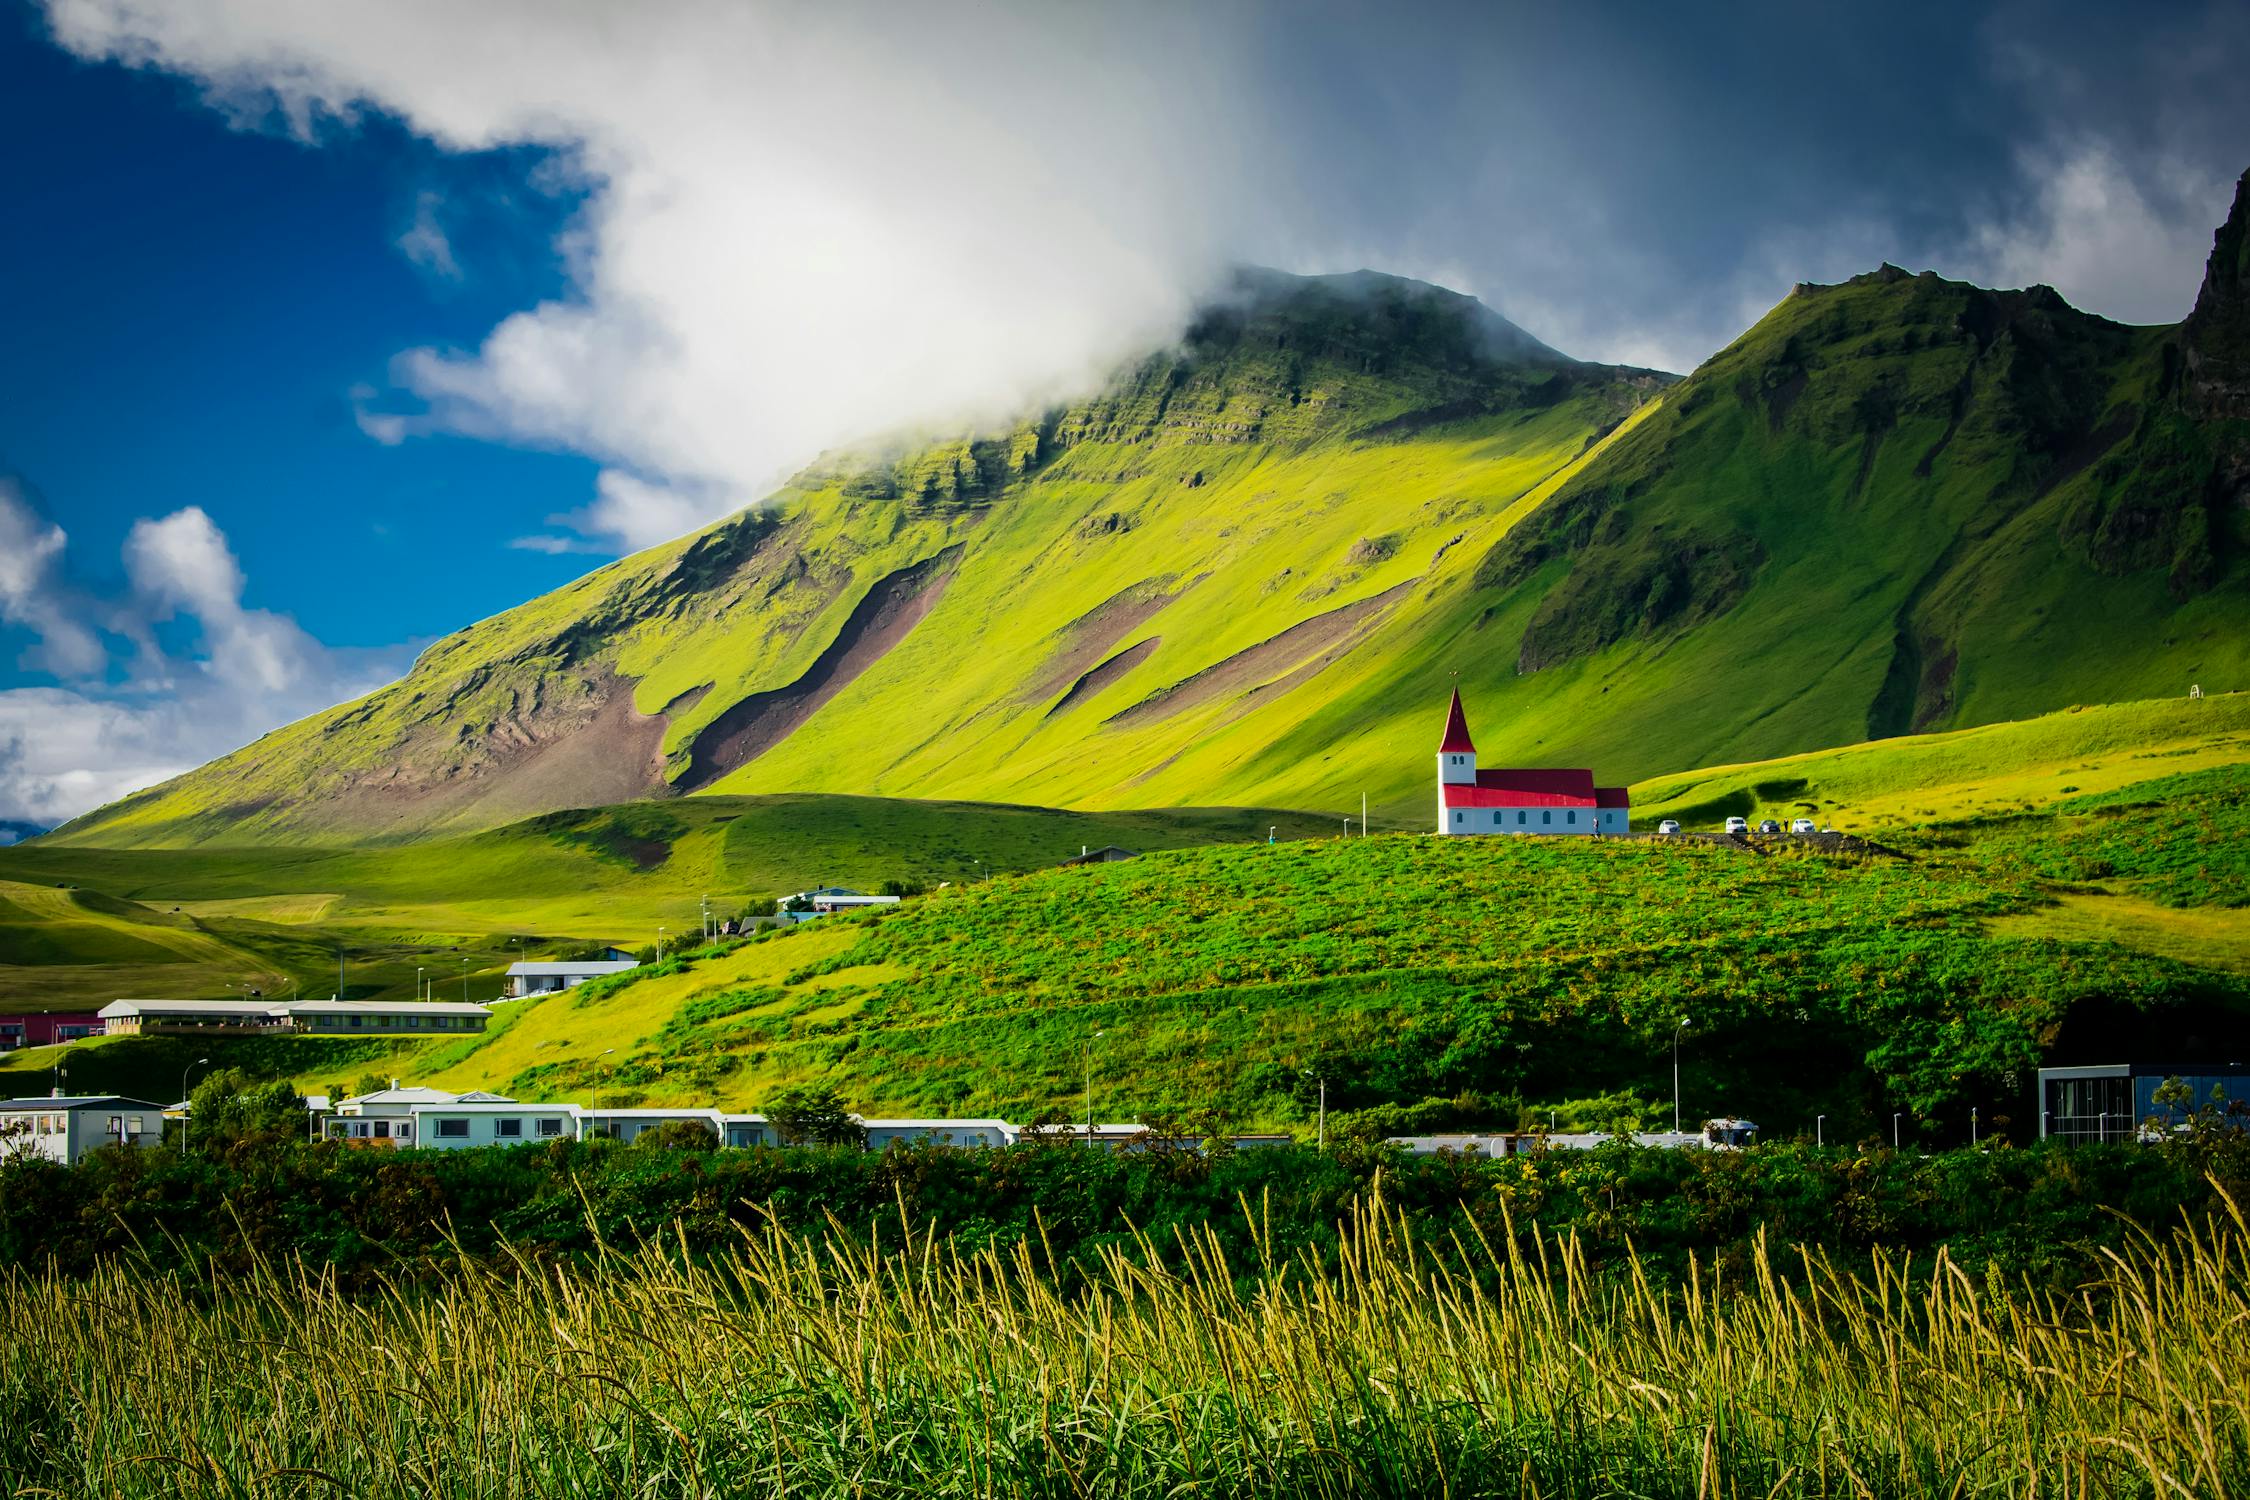 A Family Trip to Explore Iceland by Car